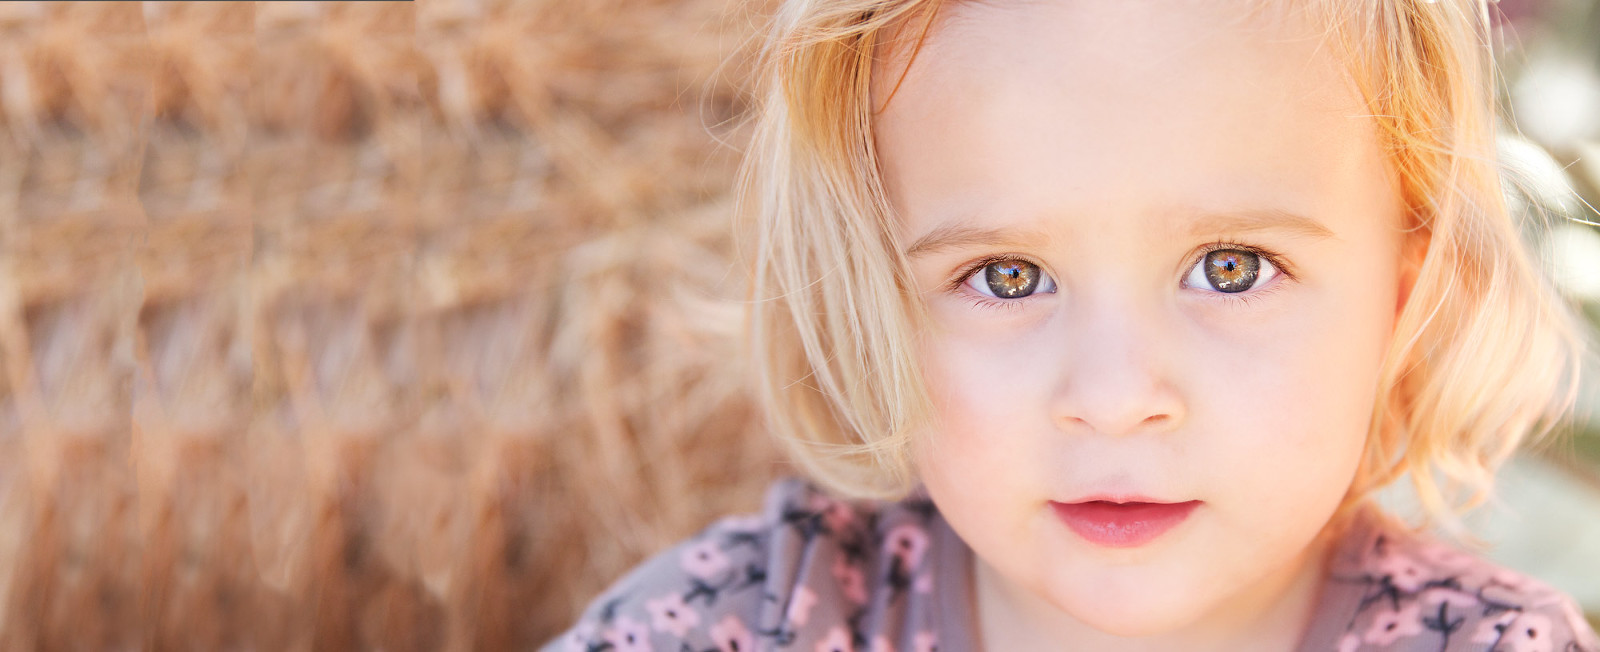 Austin Family Photographer's picture of a child's face with stunning eyes